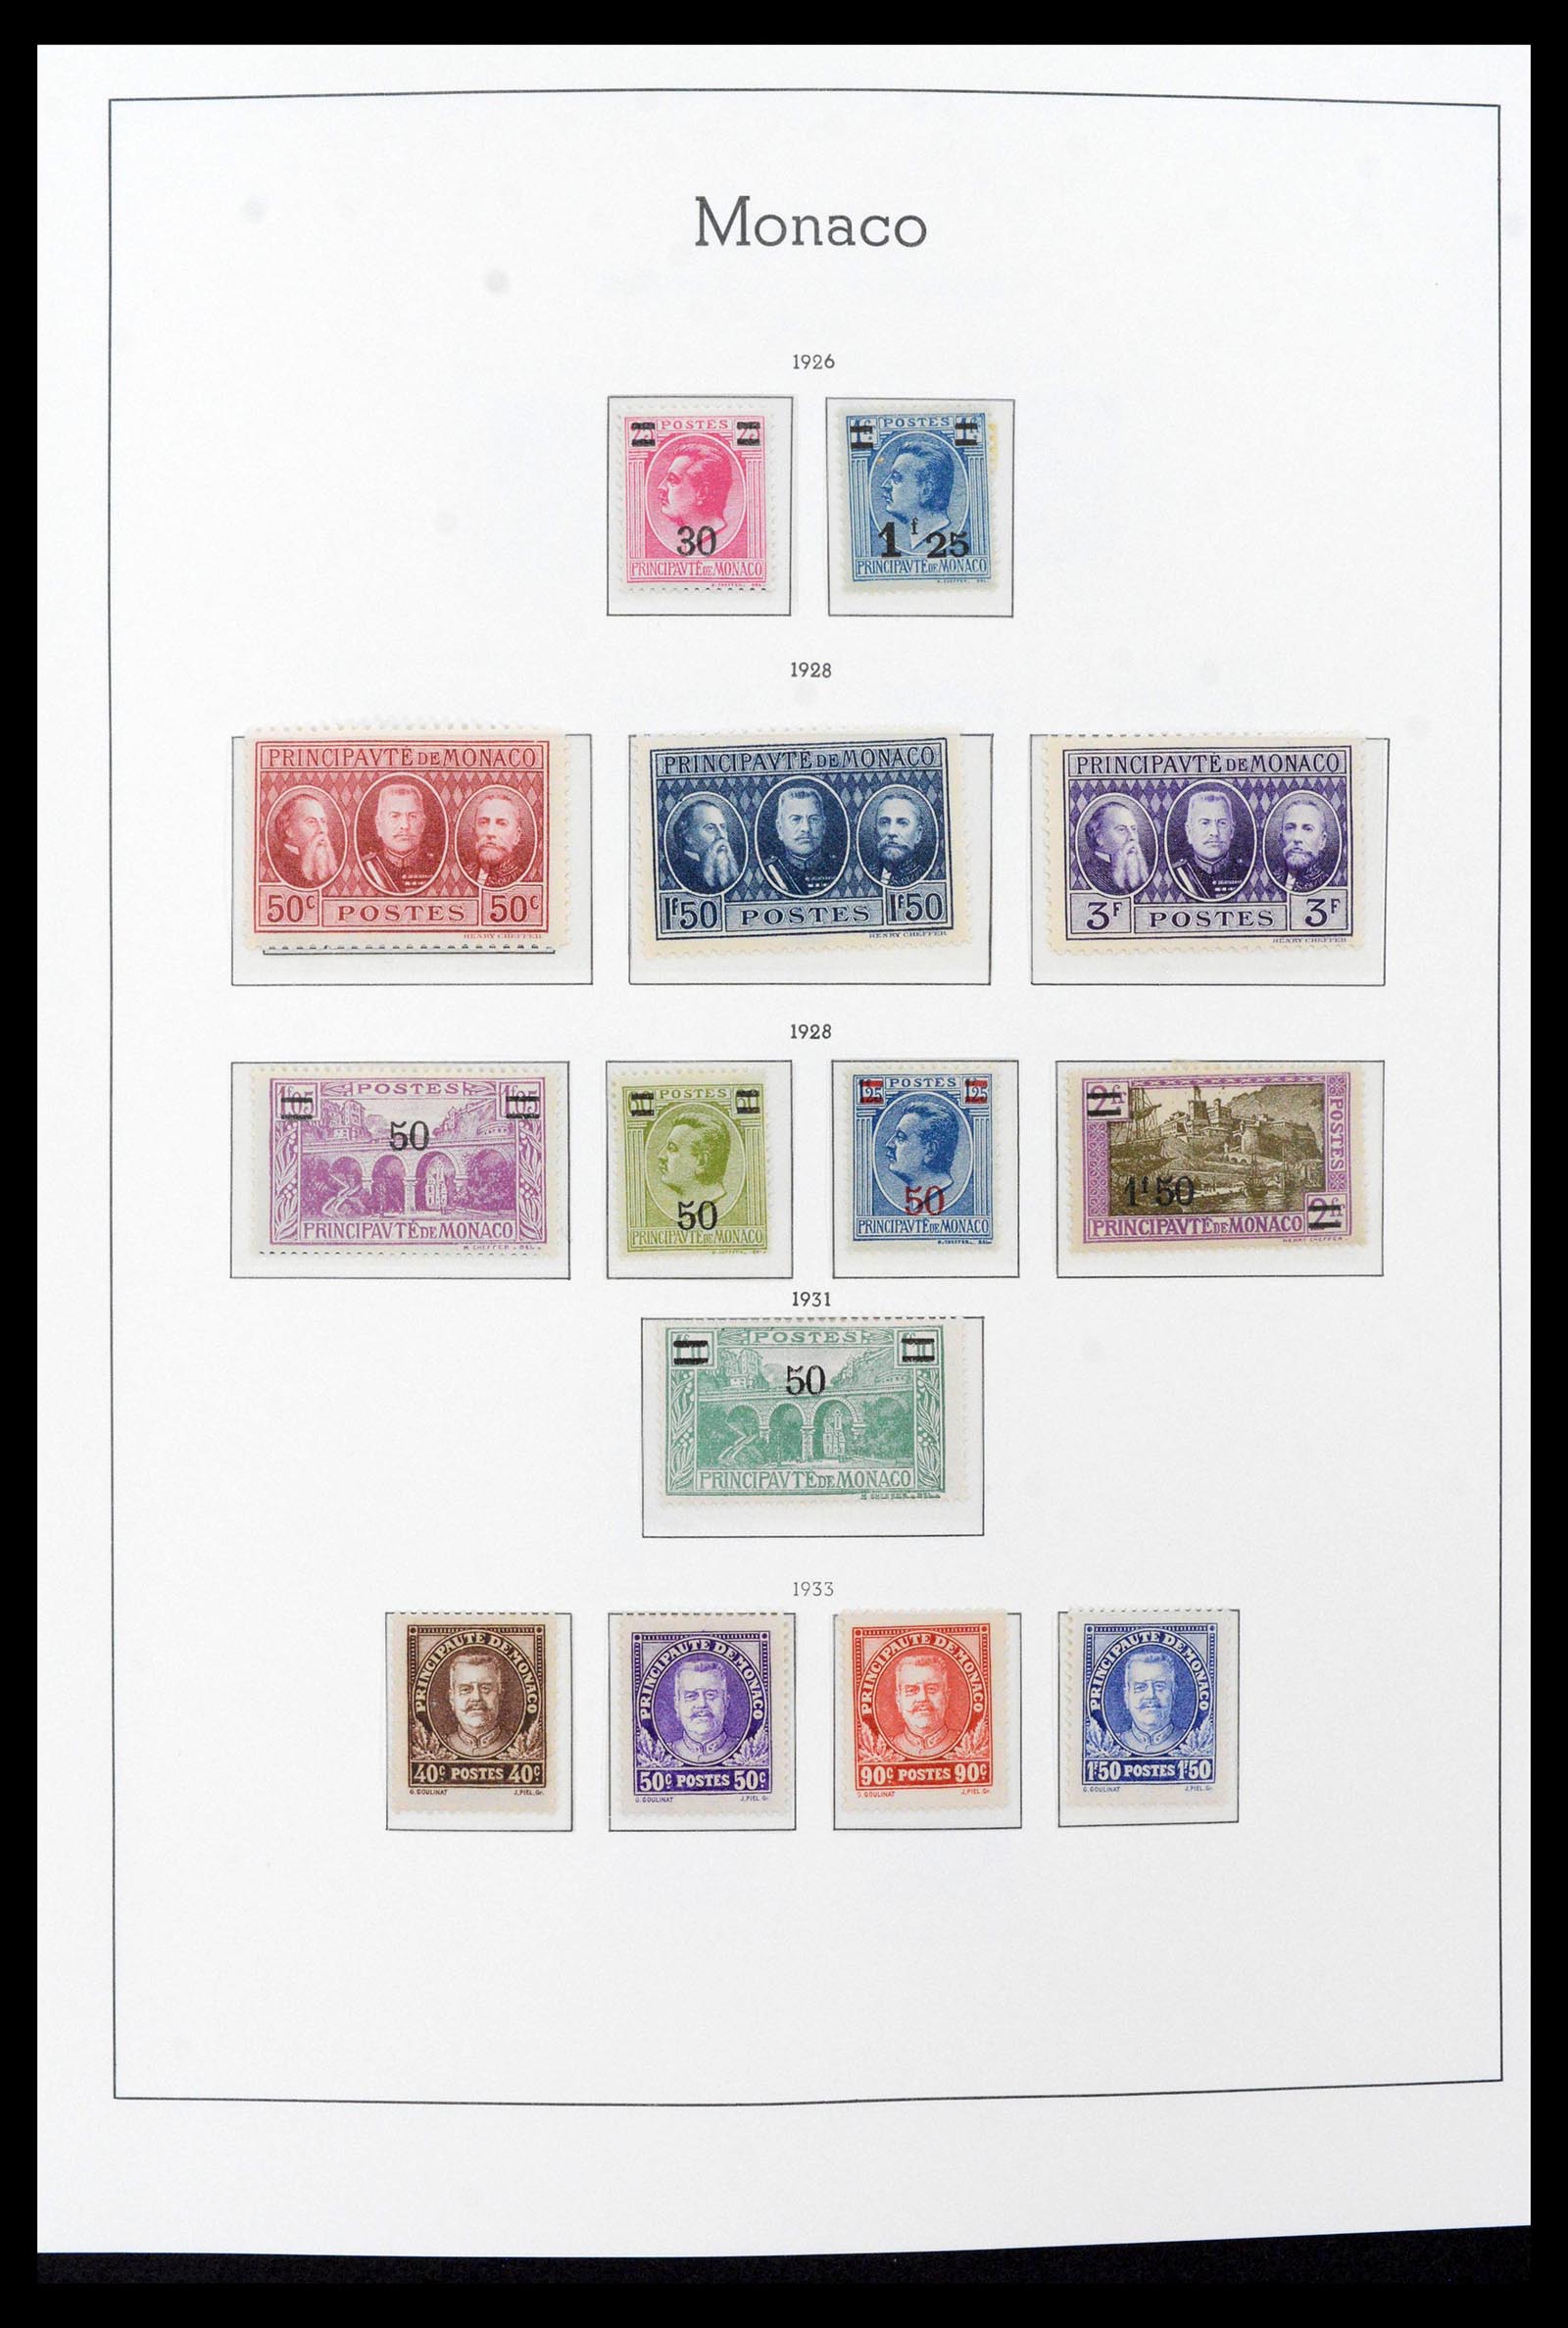 39390 0009 - Stamp collection 39390 Monaco complete 1885-1990.